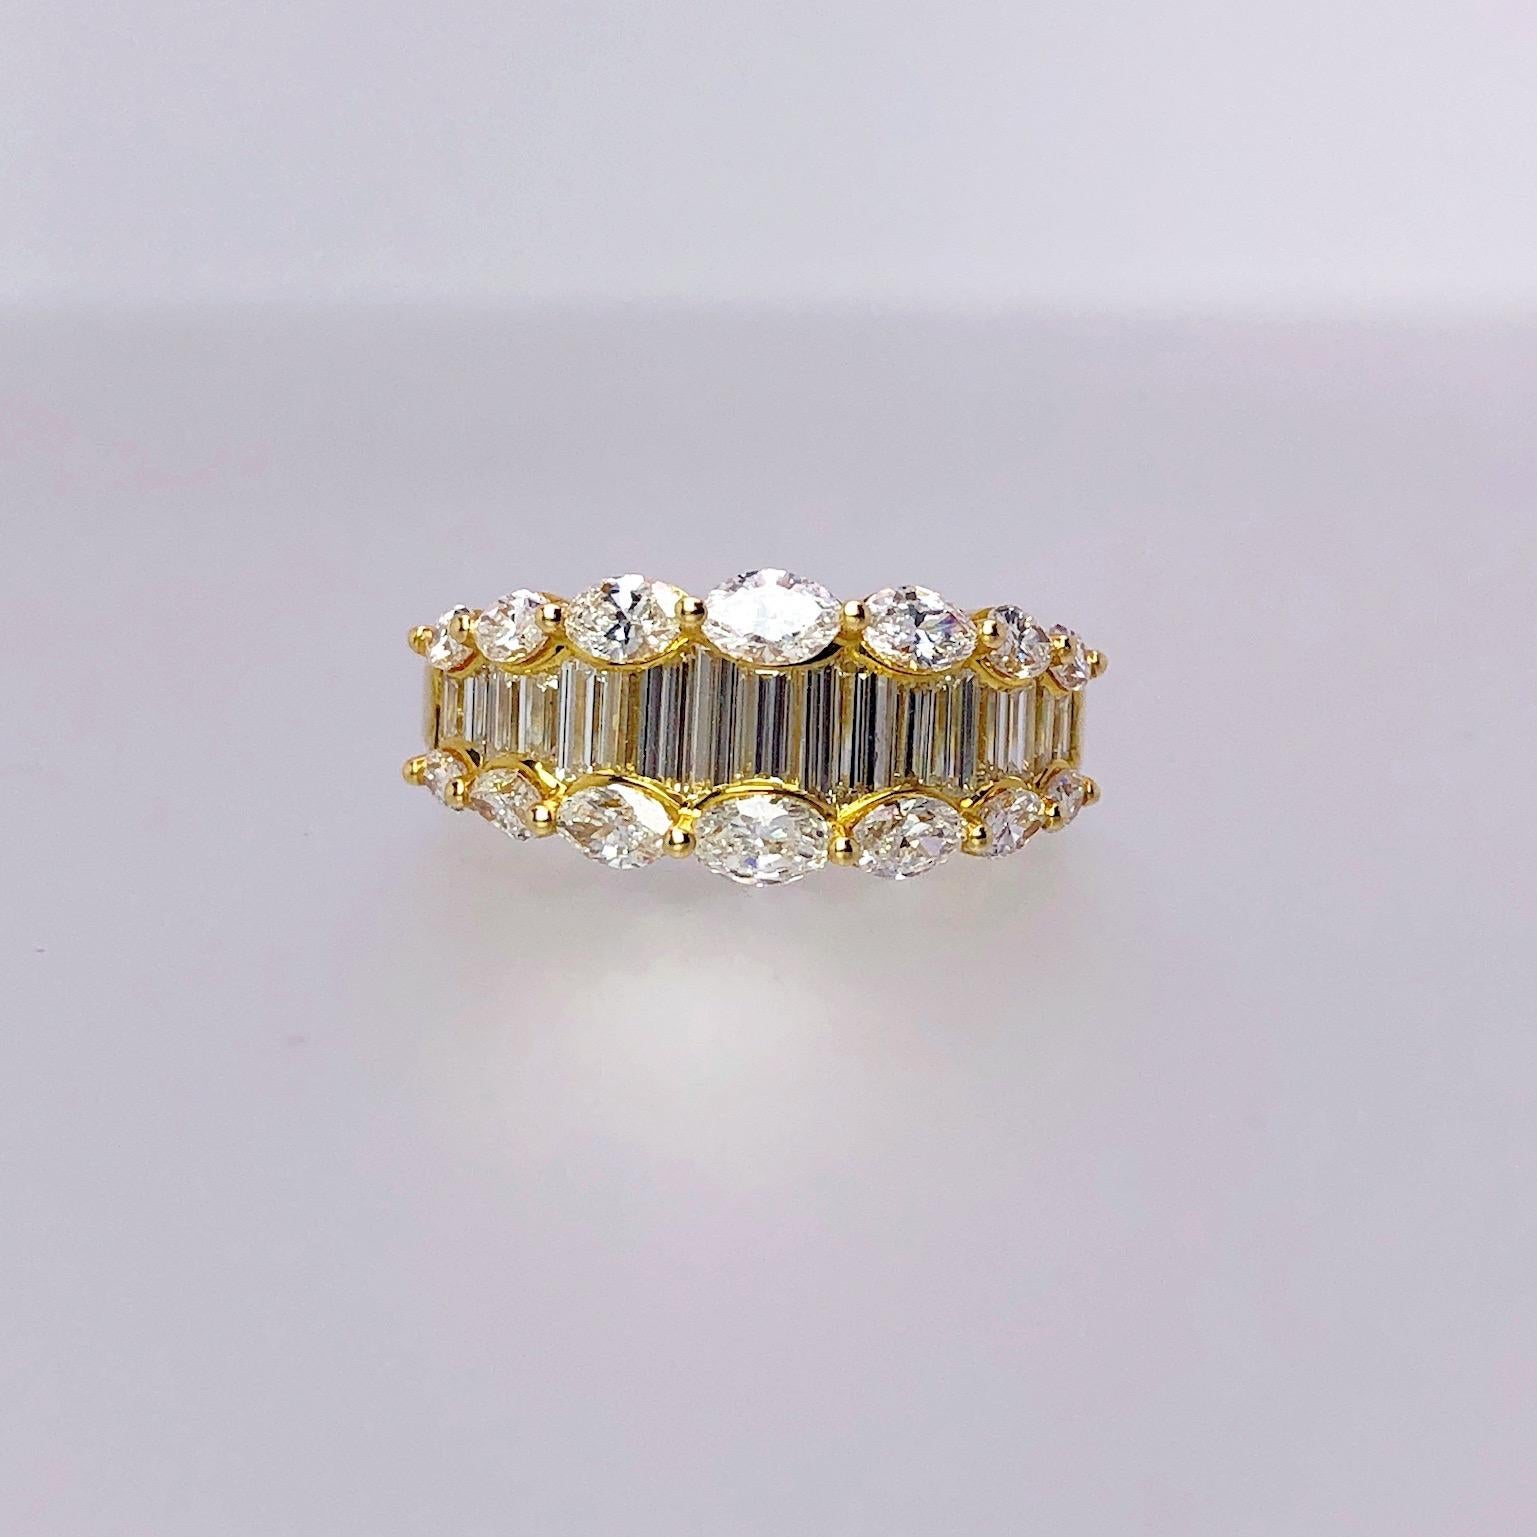 Nova 18 Karat Yellow Gold, 2.33 Carat Baguette and Marquise Diamond Ring For Sale 3